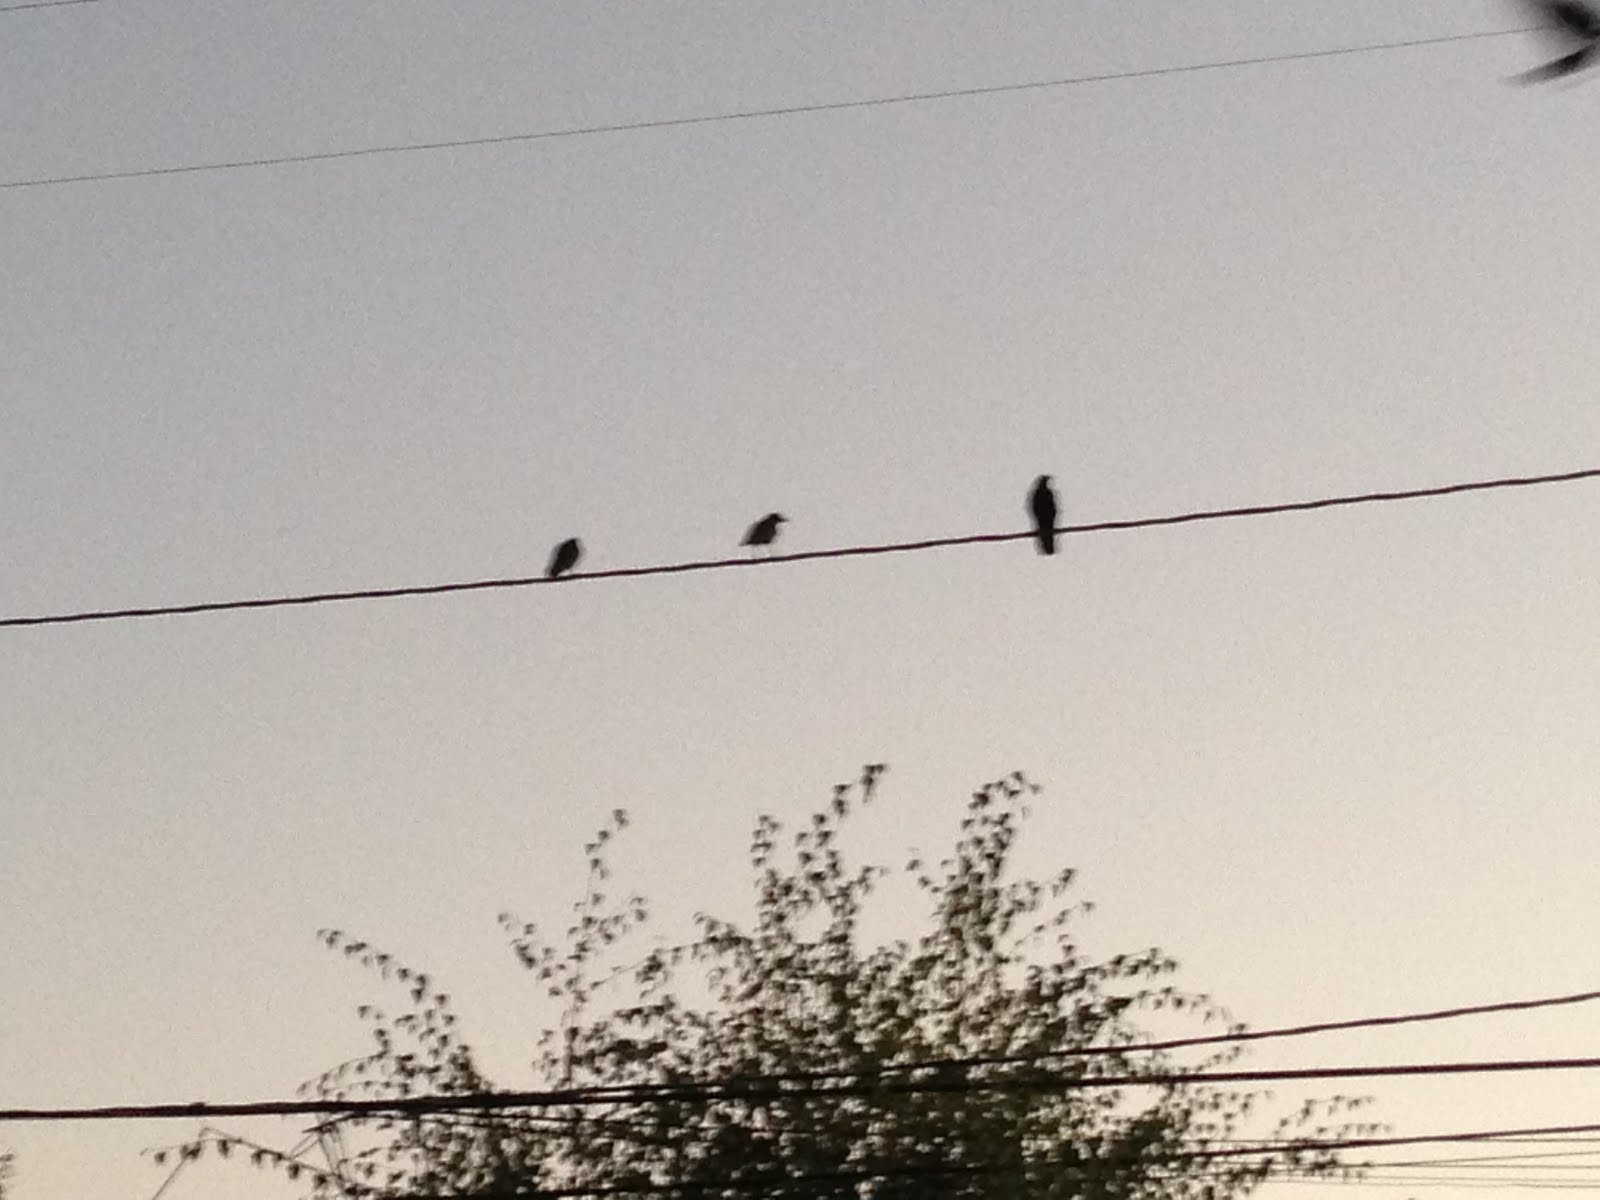 The birds on the wire